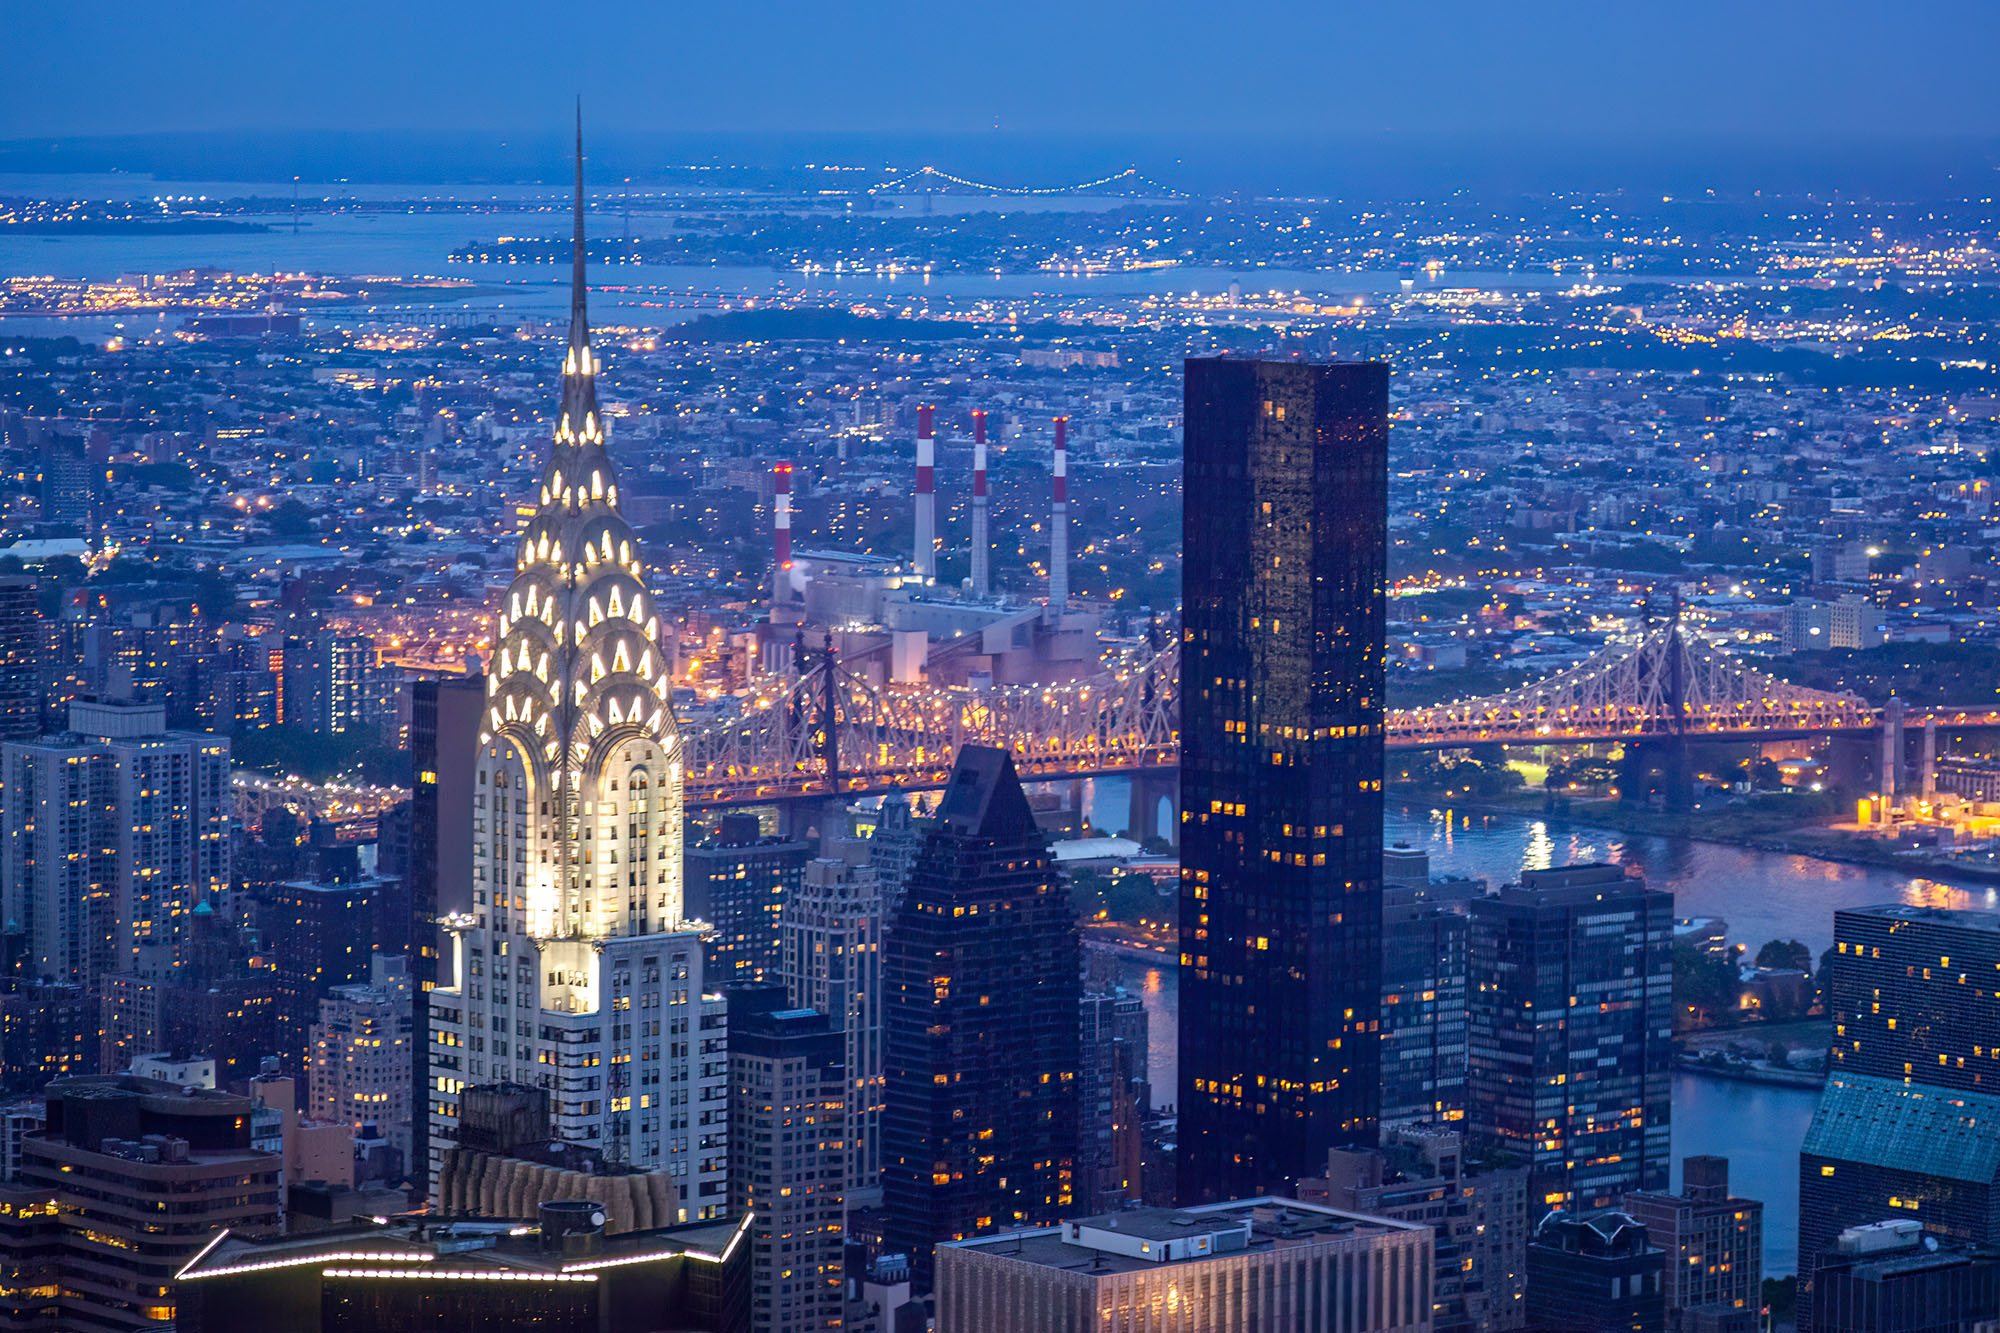 This image, captured from the Empire State Building's summit during the serene blue hour, showcases the iconic Chrysler Building...